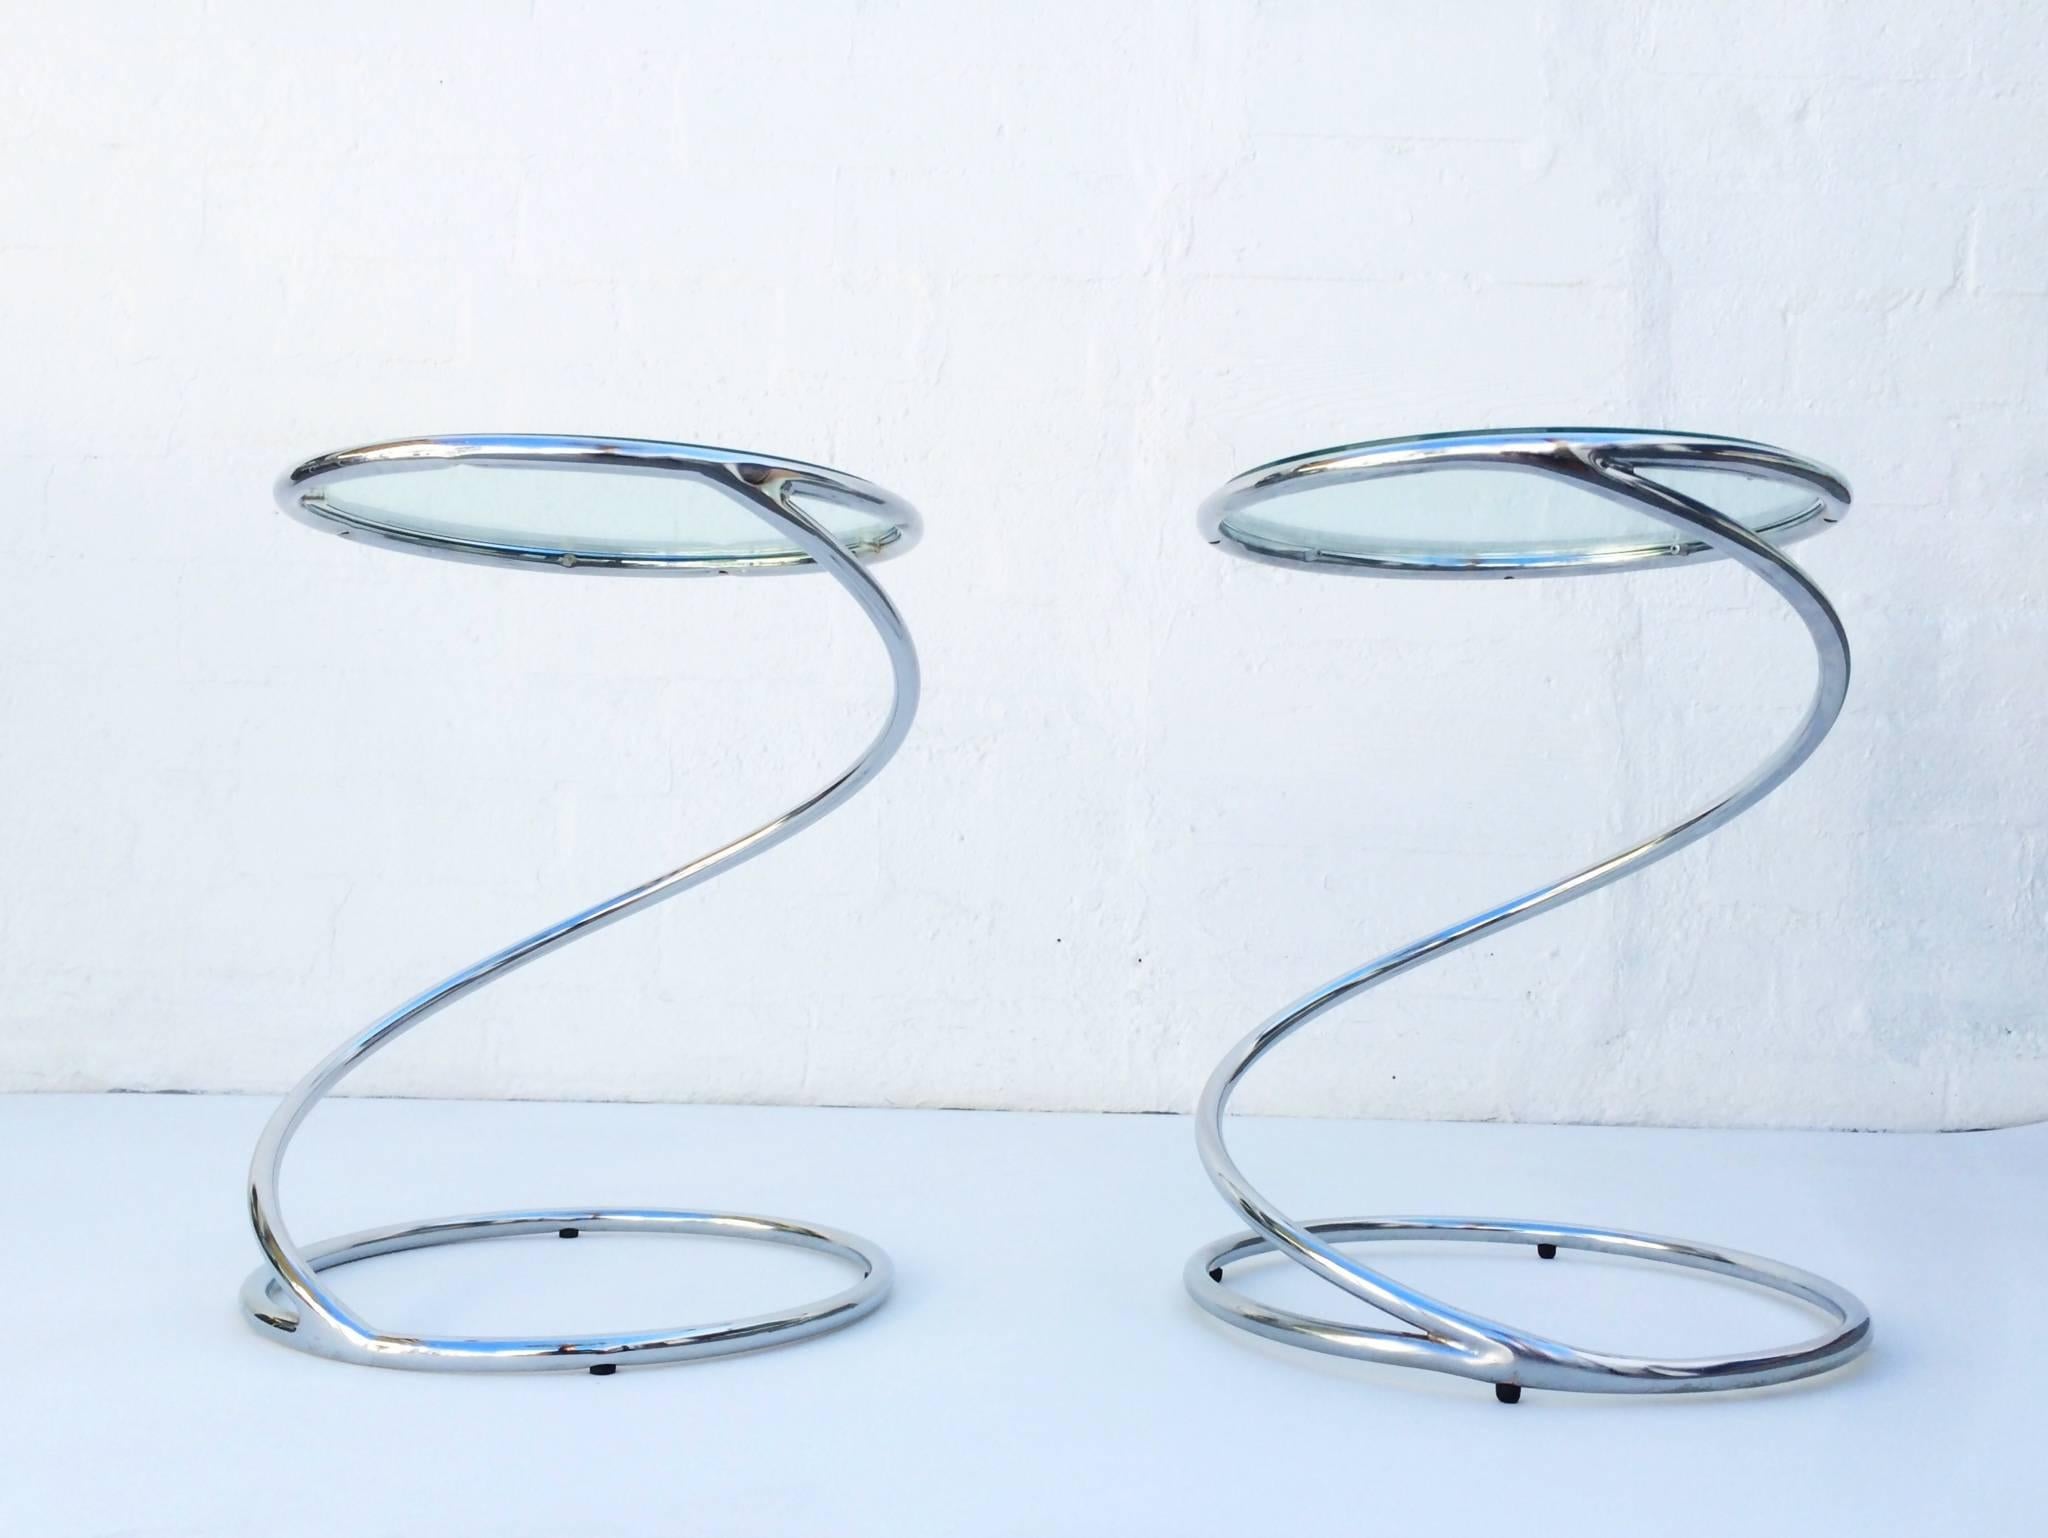 American Polished Chrome and Glass Spiral Occasional Tables by Leon Rosen for Pace